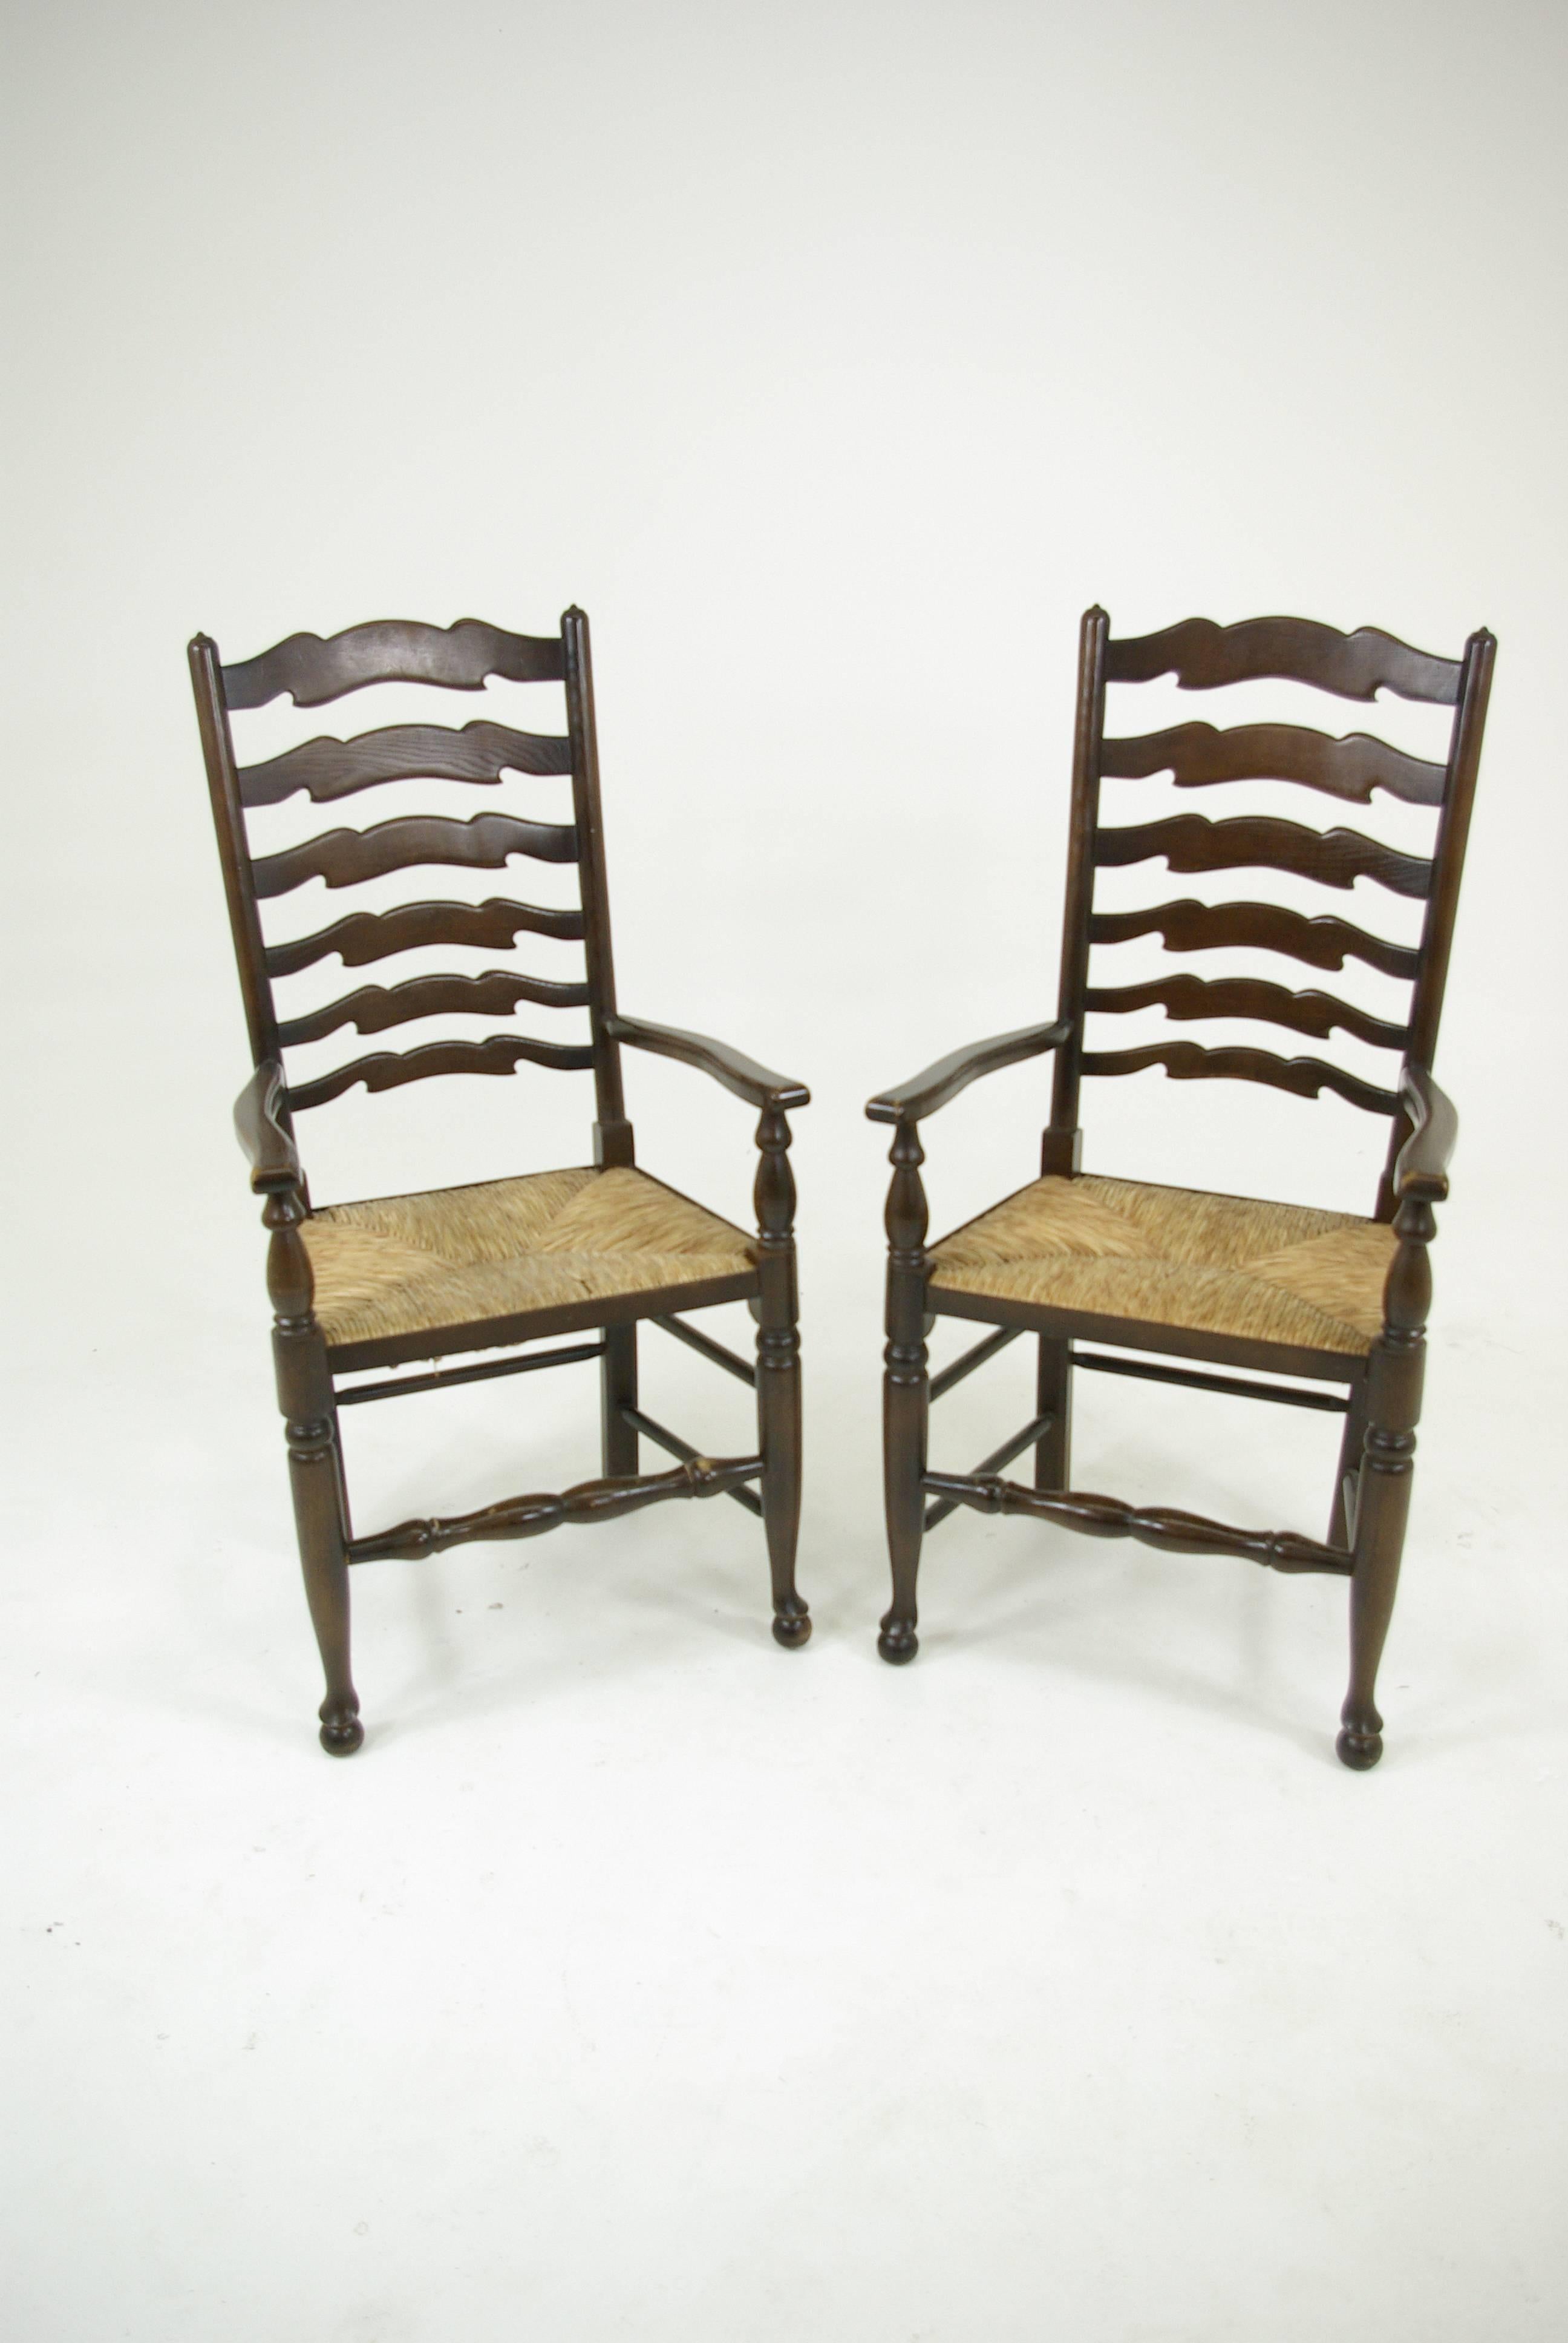 Hand-Crafted Set of eight Antique Ladder Back Chairs, Rush Seats, Six + Two Armchairs